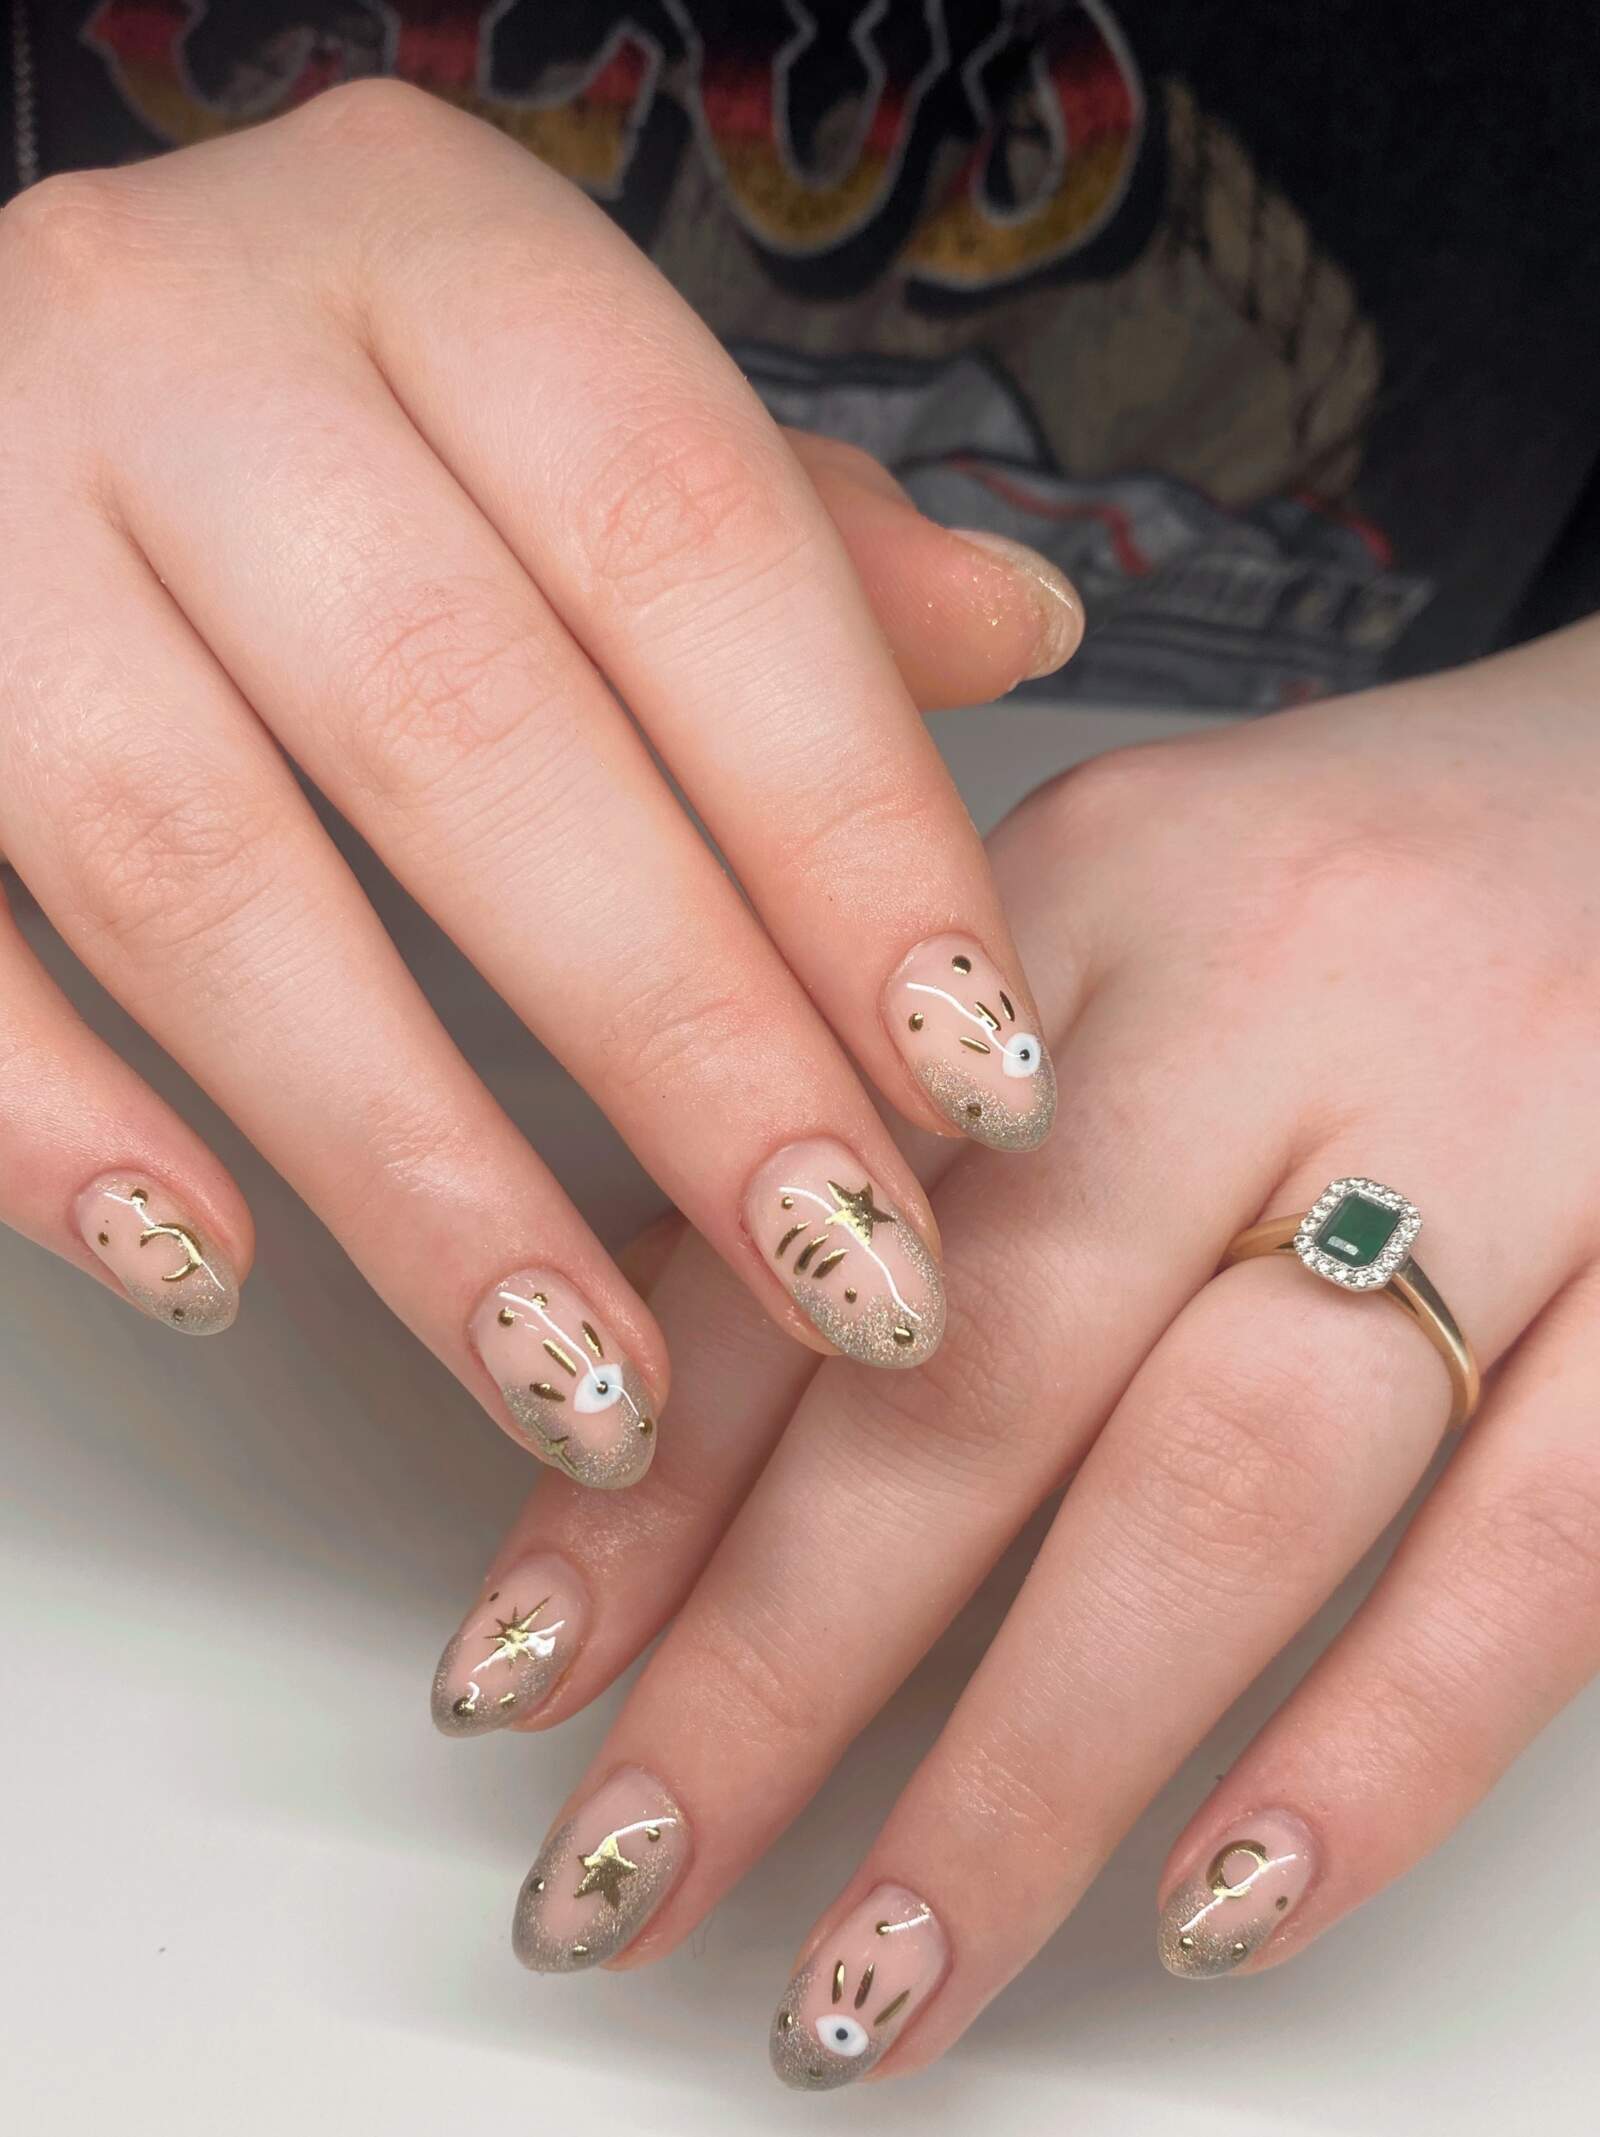 8 Christmas Nail Art Designs To Get You In The Festive Spirit | Tatler Asia